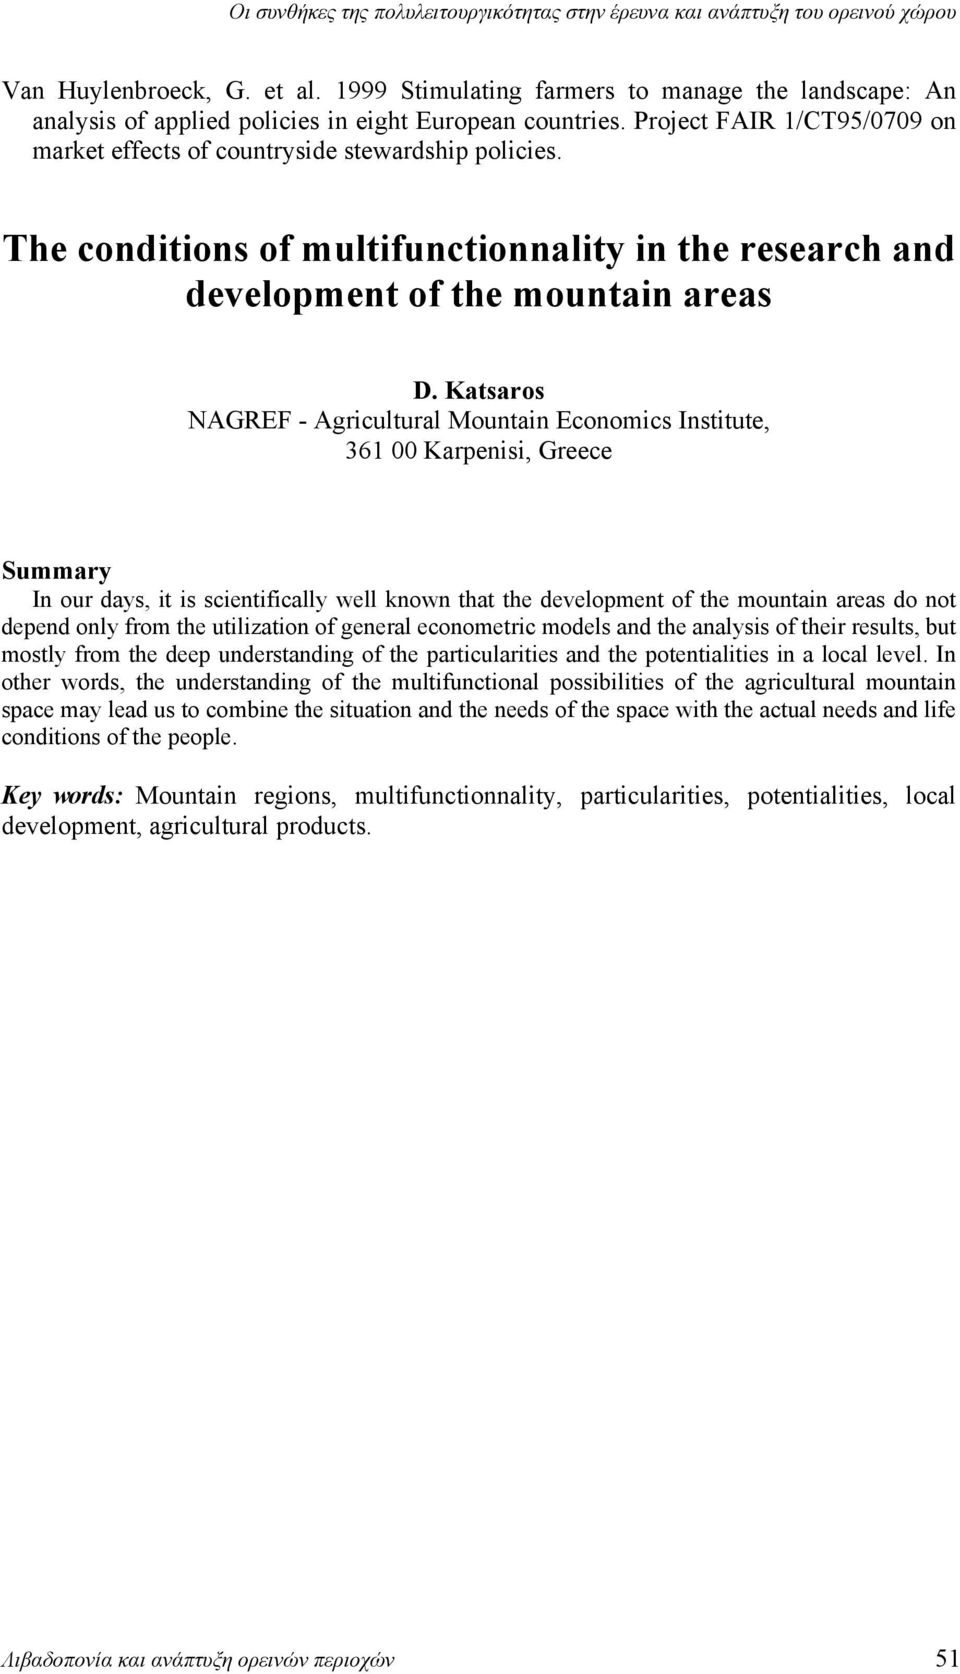 Katsaros NAGREF - Agricultural Mountain Economics Institute, 361 00 Karpenisi, Greece Summary In our days, it is scientifically well known that the development of the mountain areas do not depend